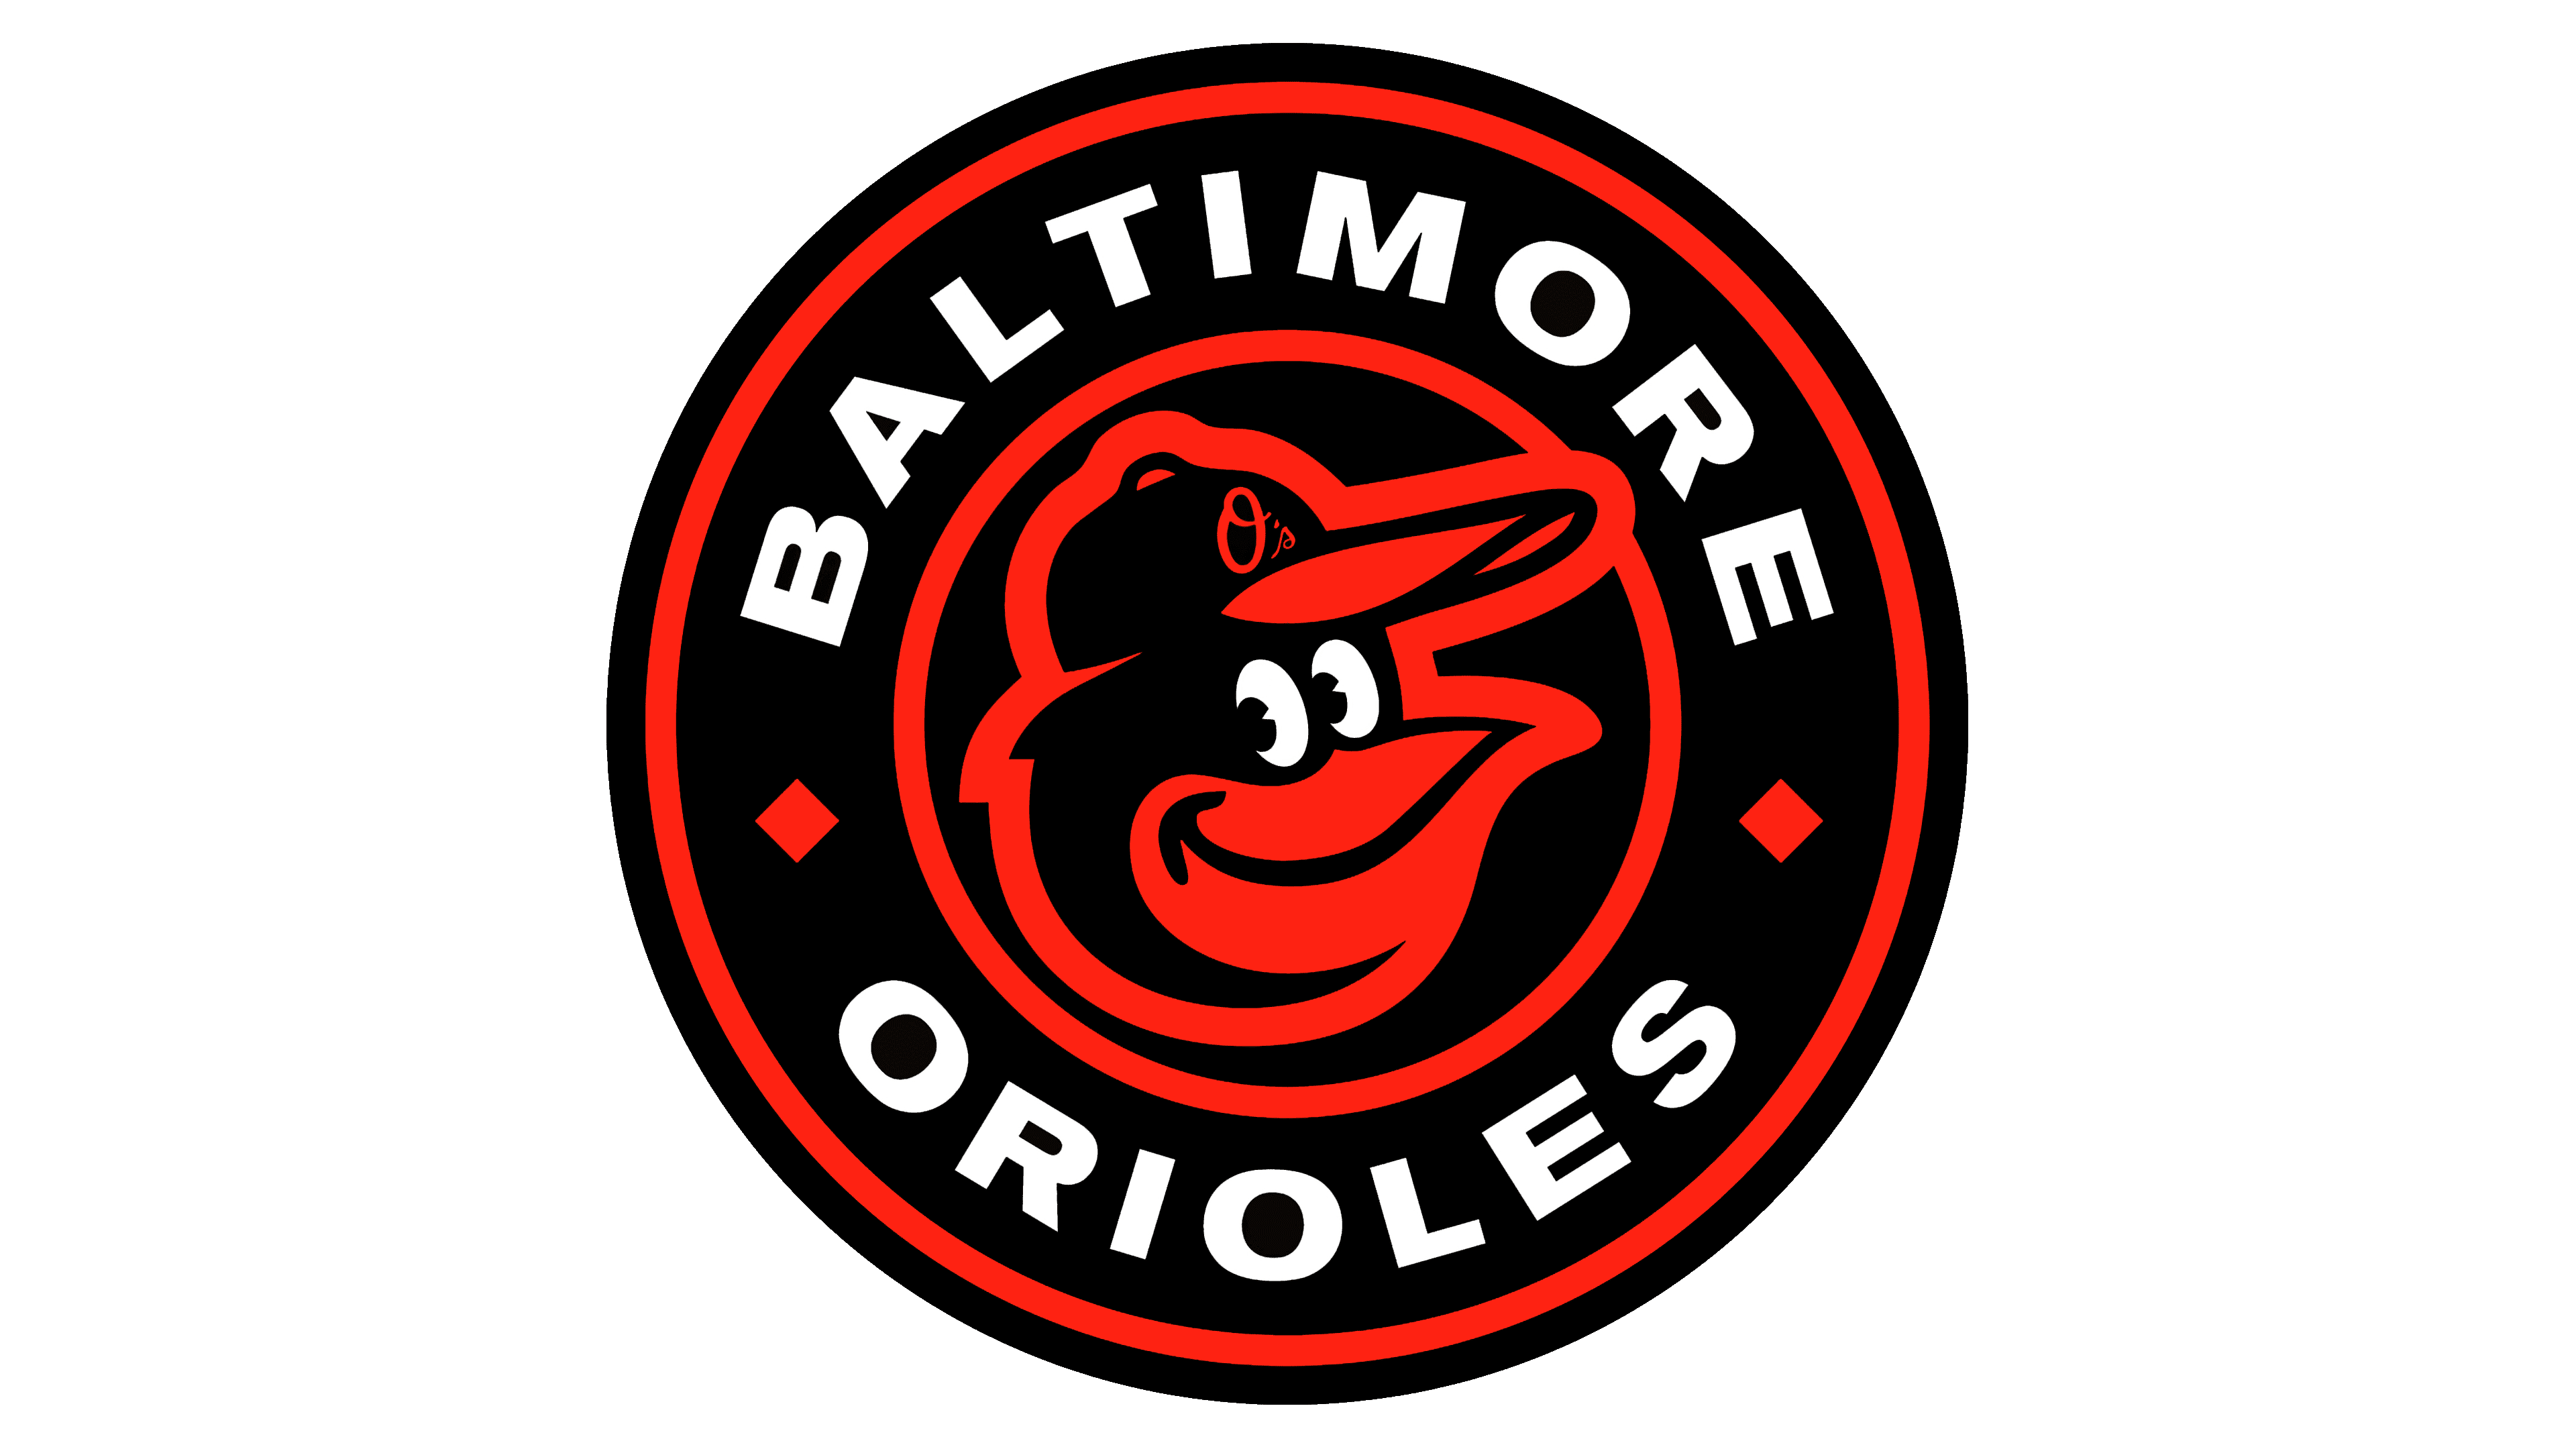 JUST IN; The oldest active player in Major League Baseball is a former pitcher for the Baltimore Orioles.